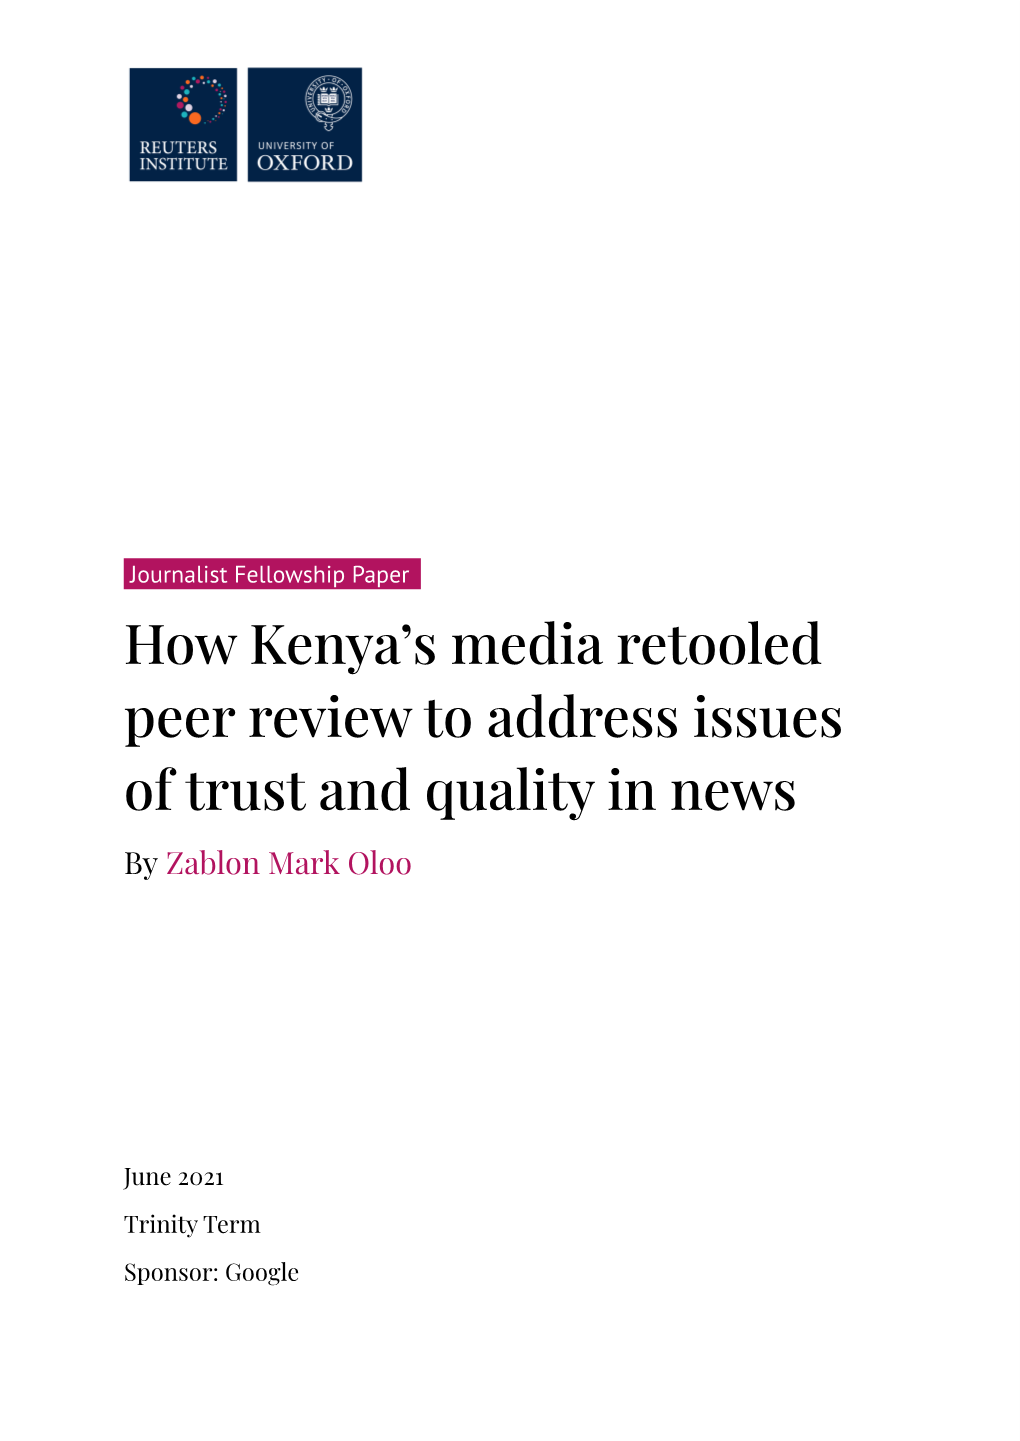 How Kenya's Media Retooled Peer Review to Address Issues of Trust